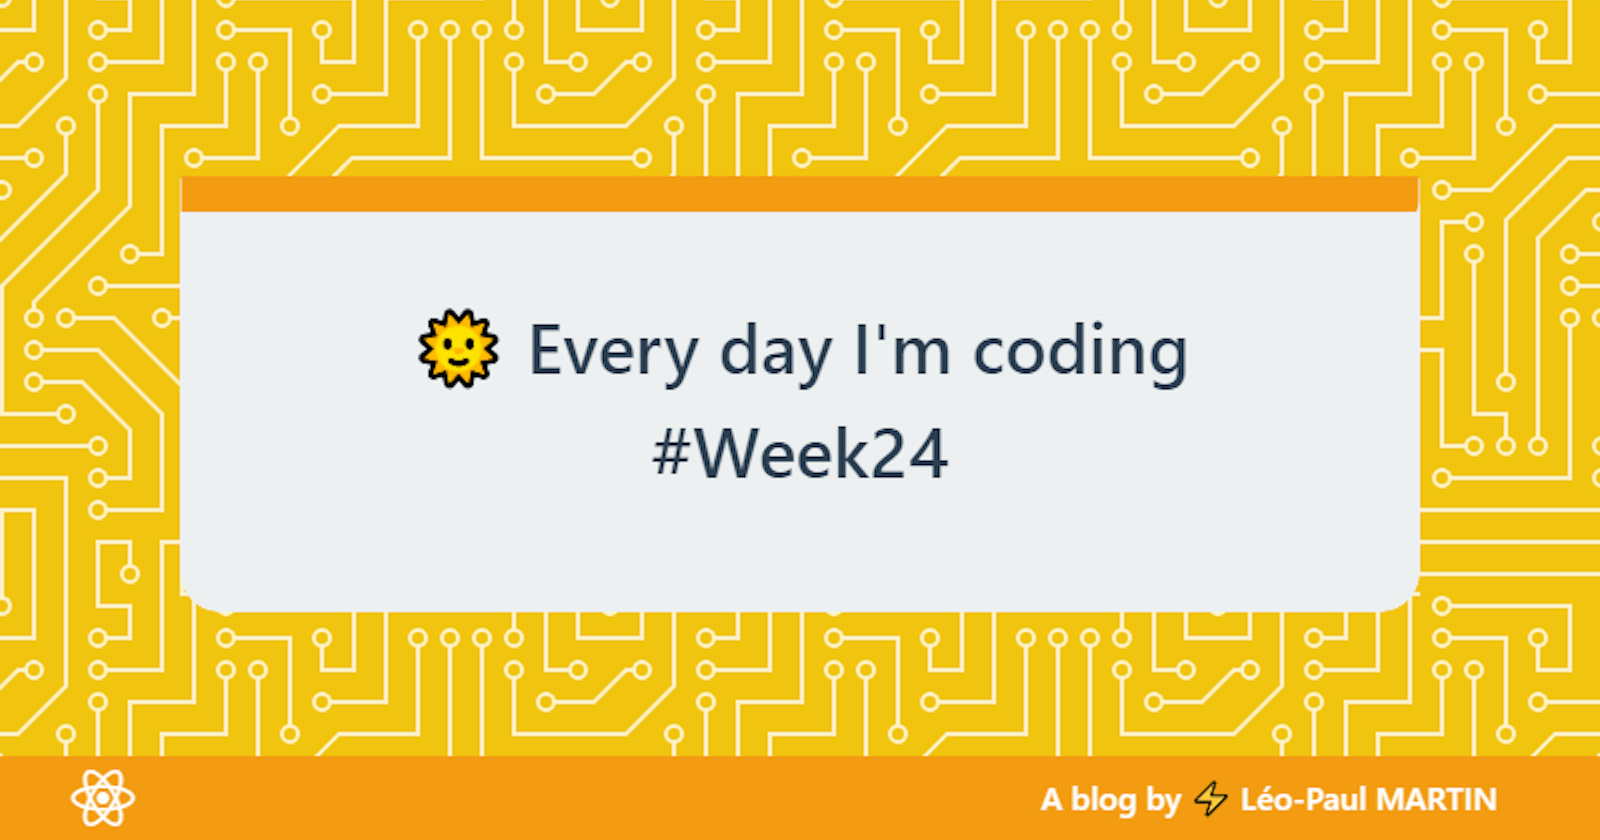 🌞 Every day I'm coding #Week24